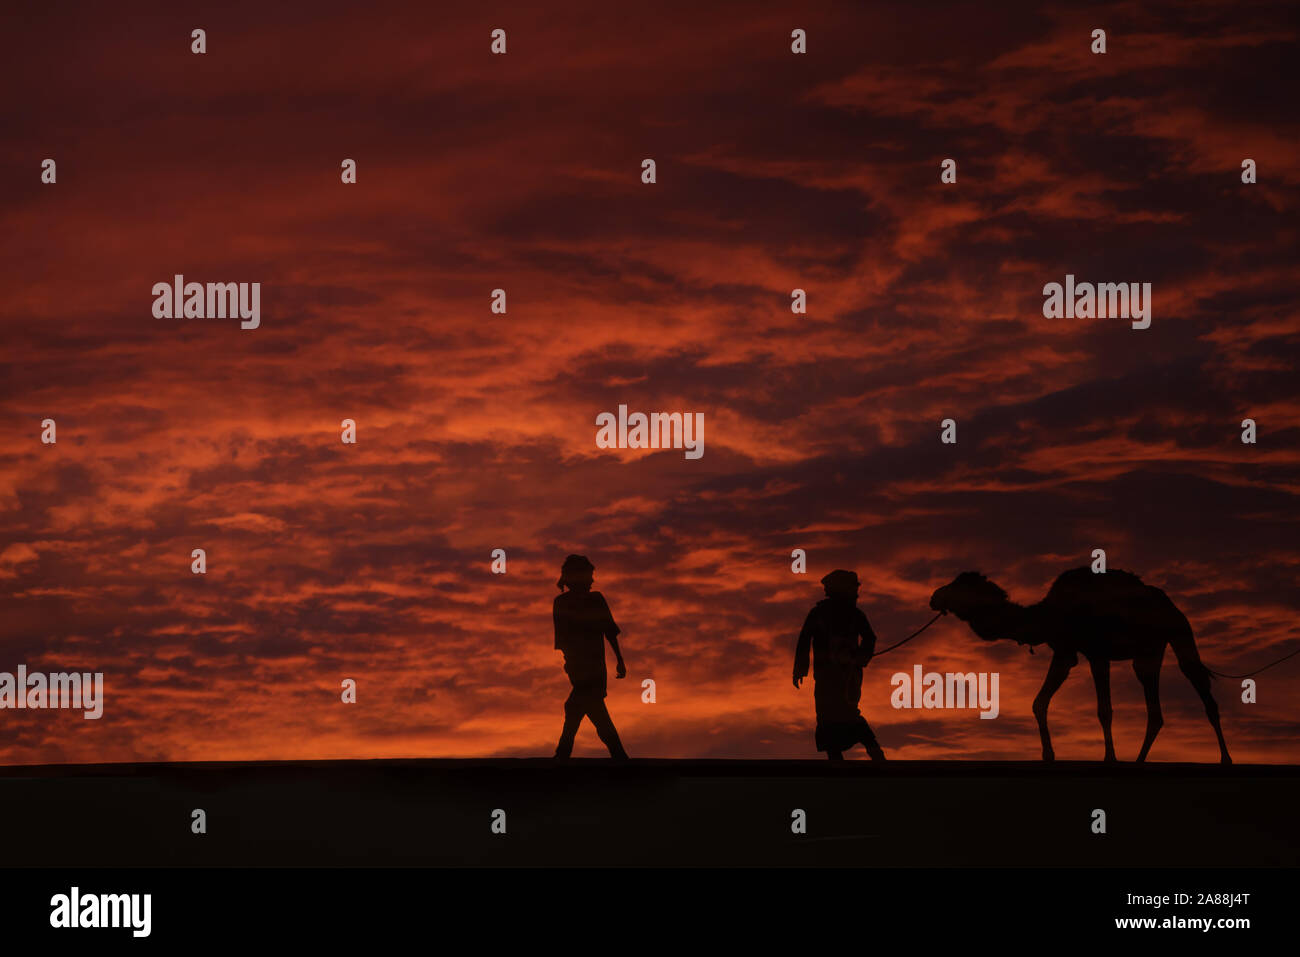 Silhouettes of two men with a camel (dromedary) in the desert against dark, red, cloudy sky. Stock Photo